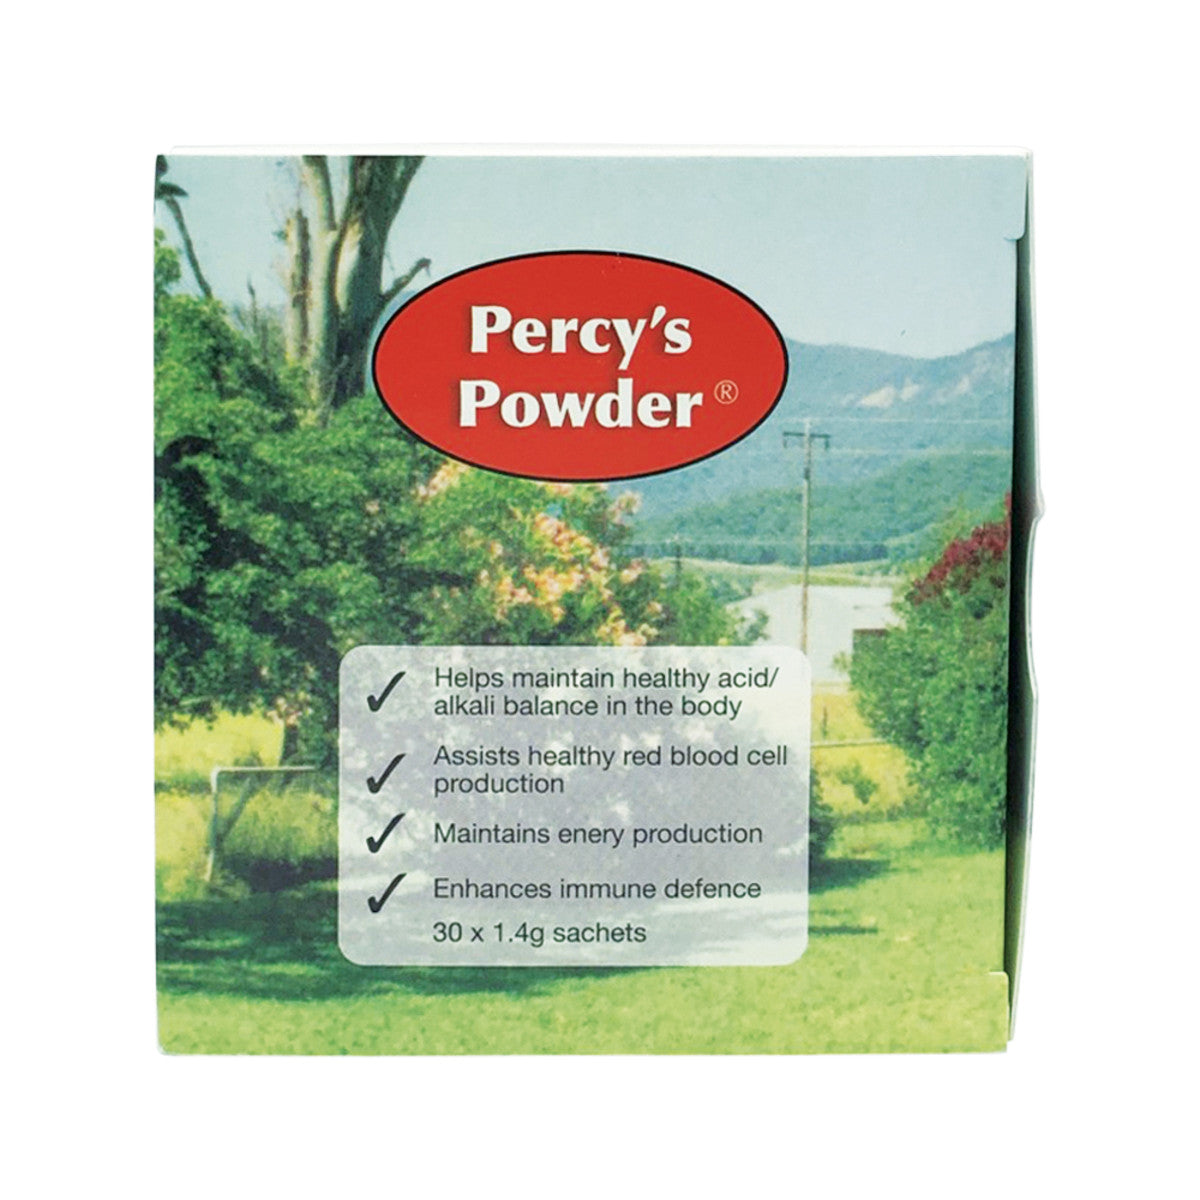 Percy's Powder (Mineral Supplement) Sachets 1.4g x 60 Pack - DECEMBER SPECIAL 15% OFF